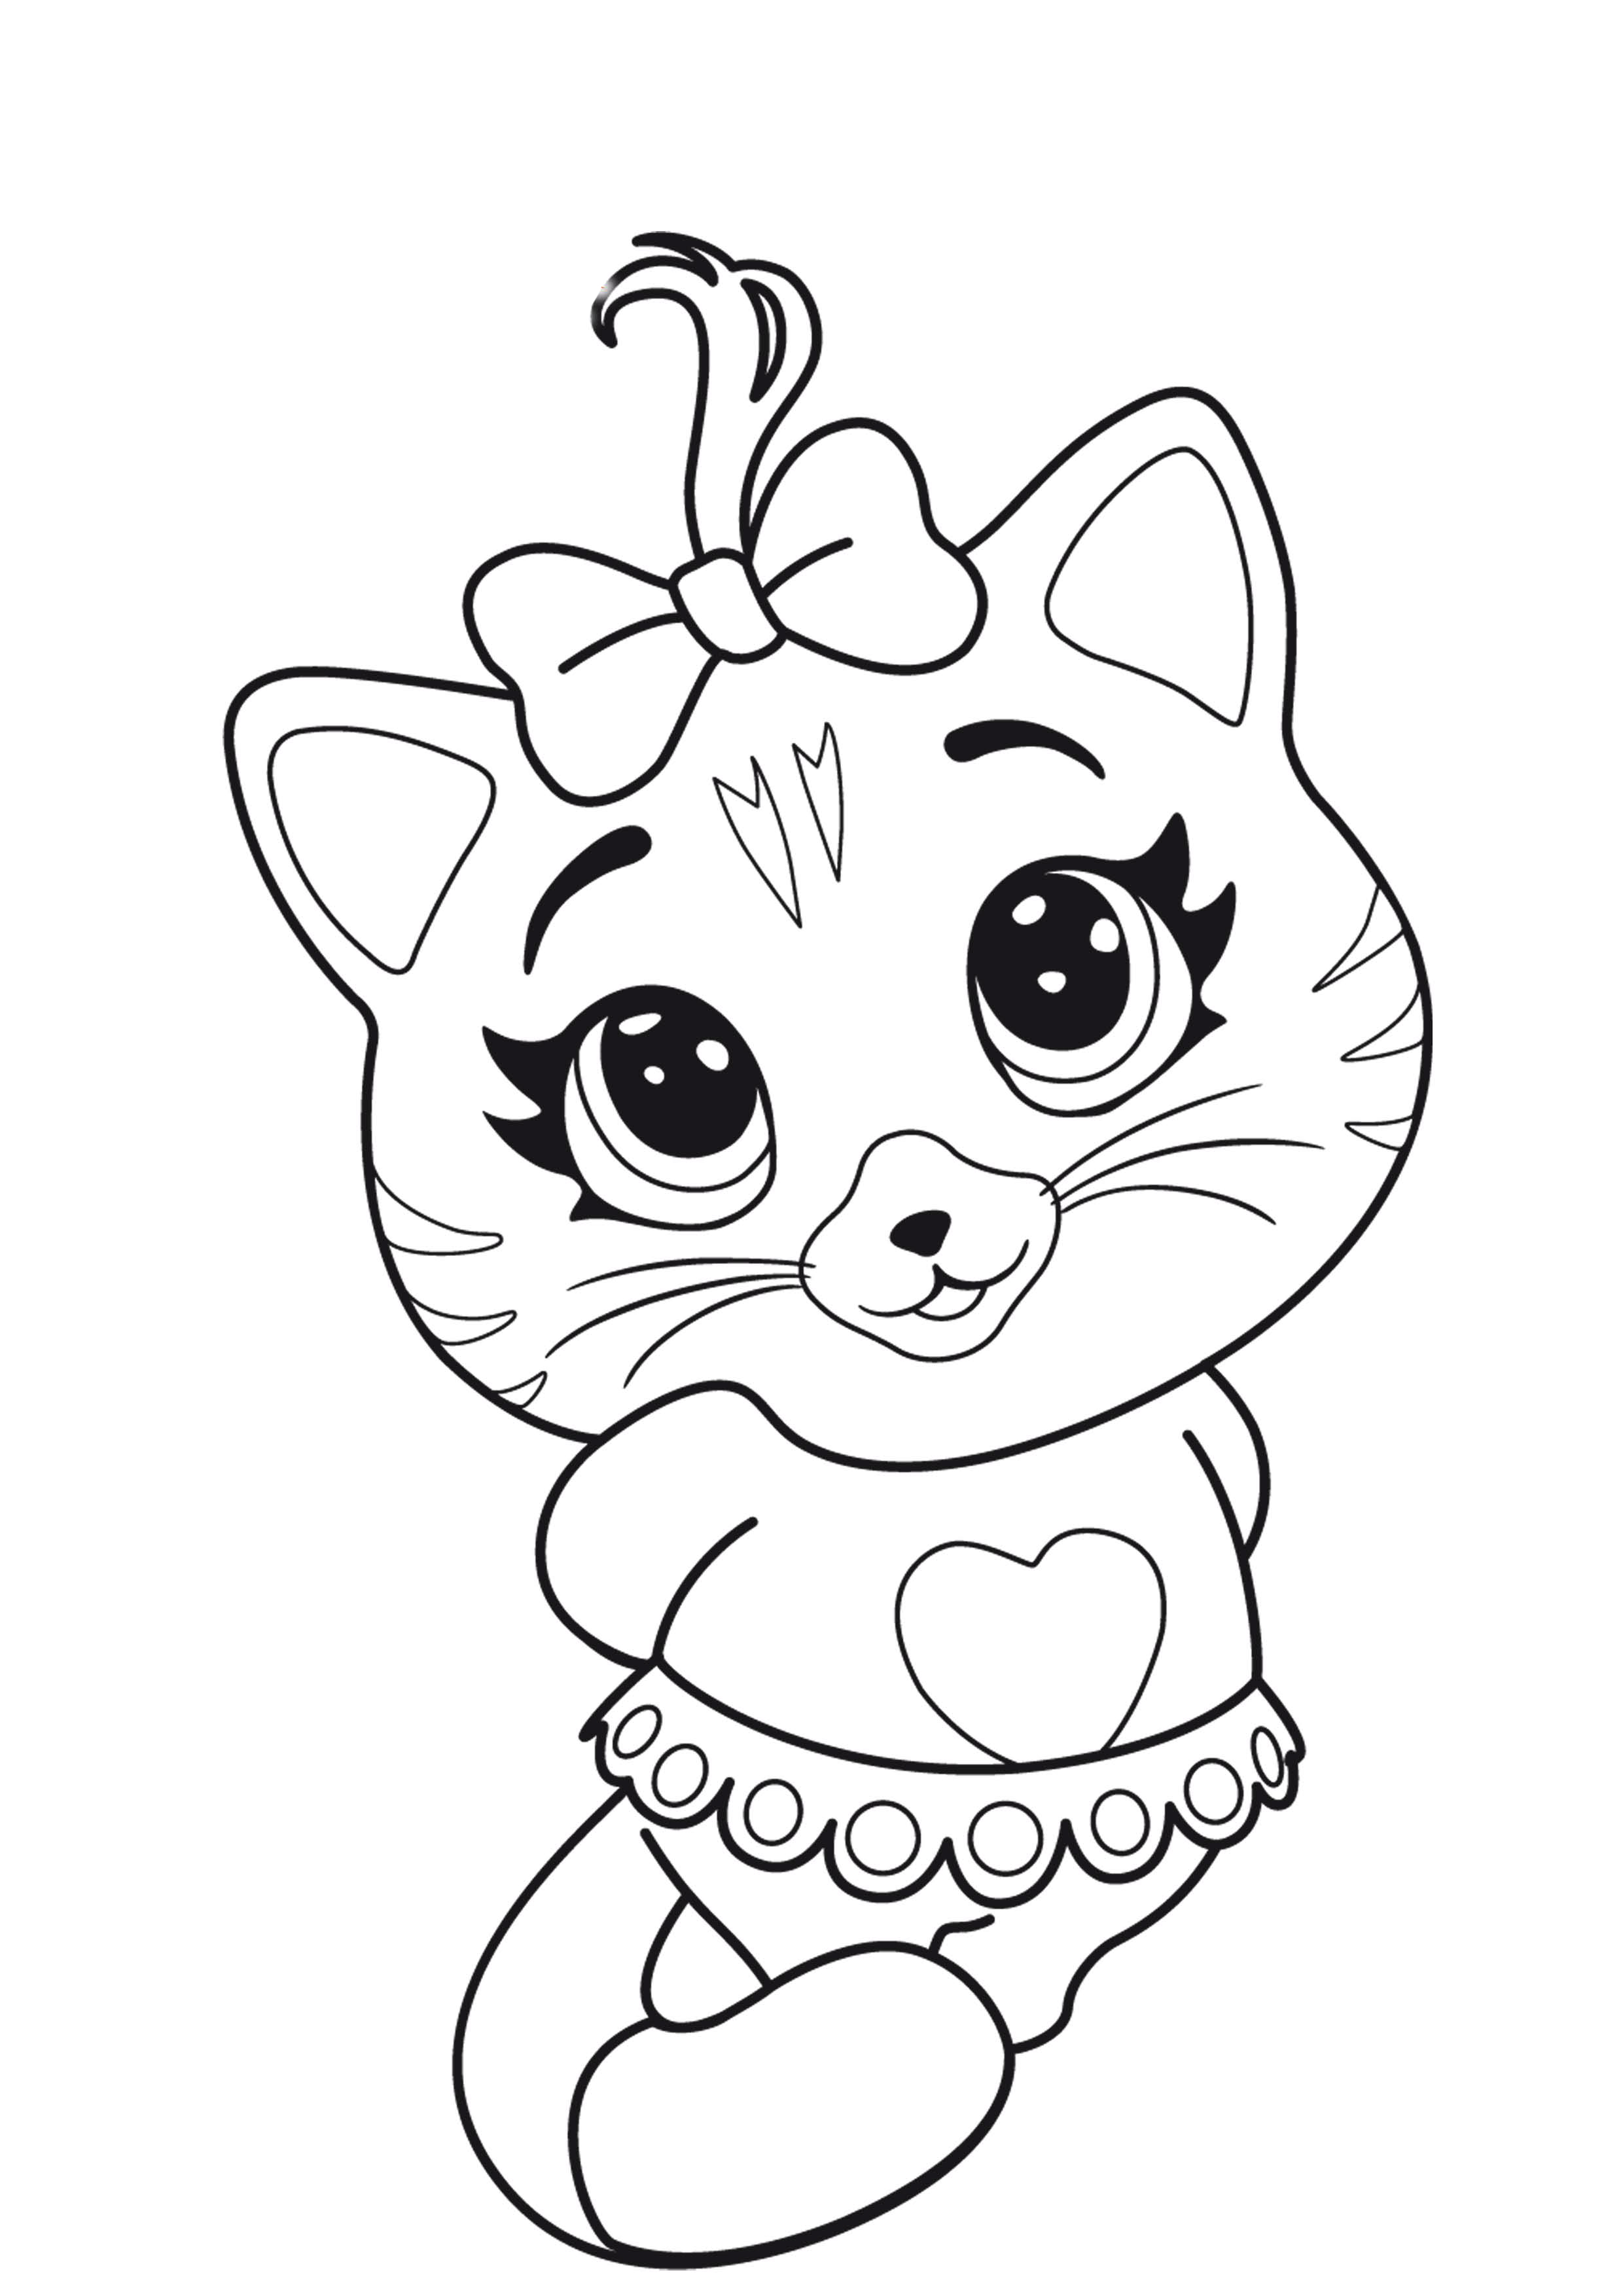 Free 44 Cats coloring pages - YouLoveIt.com